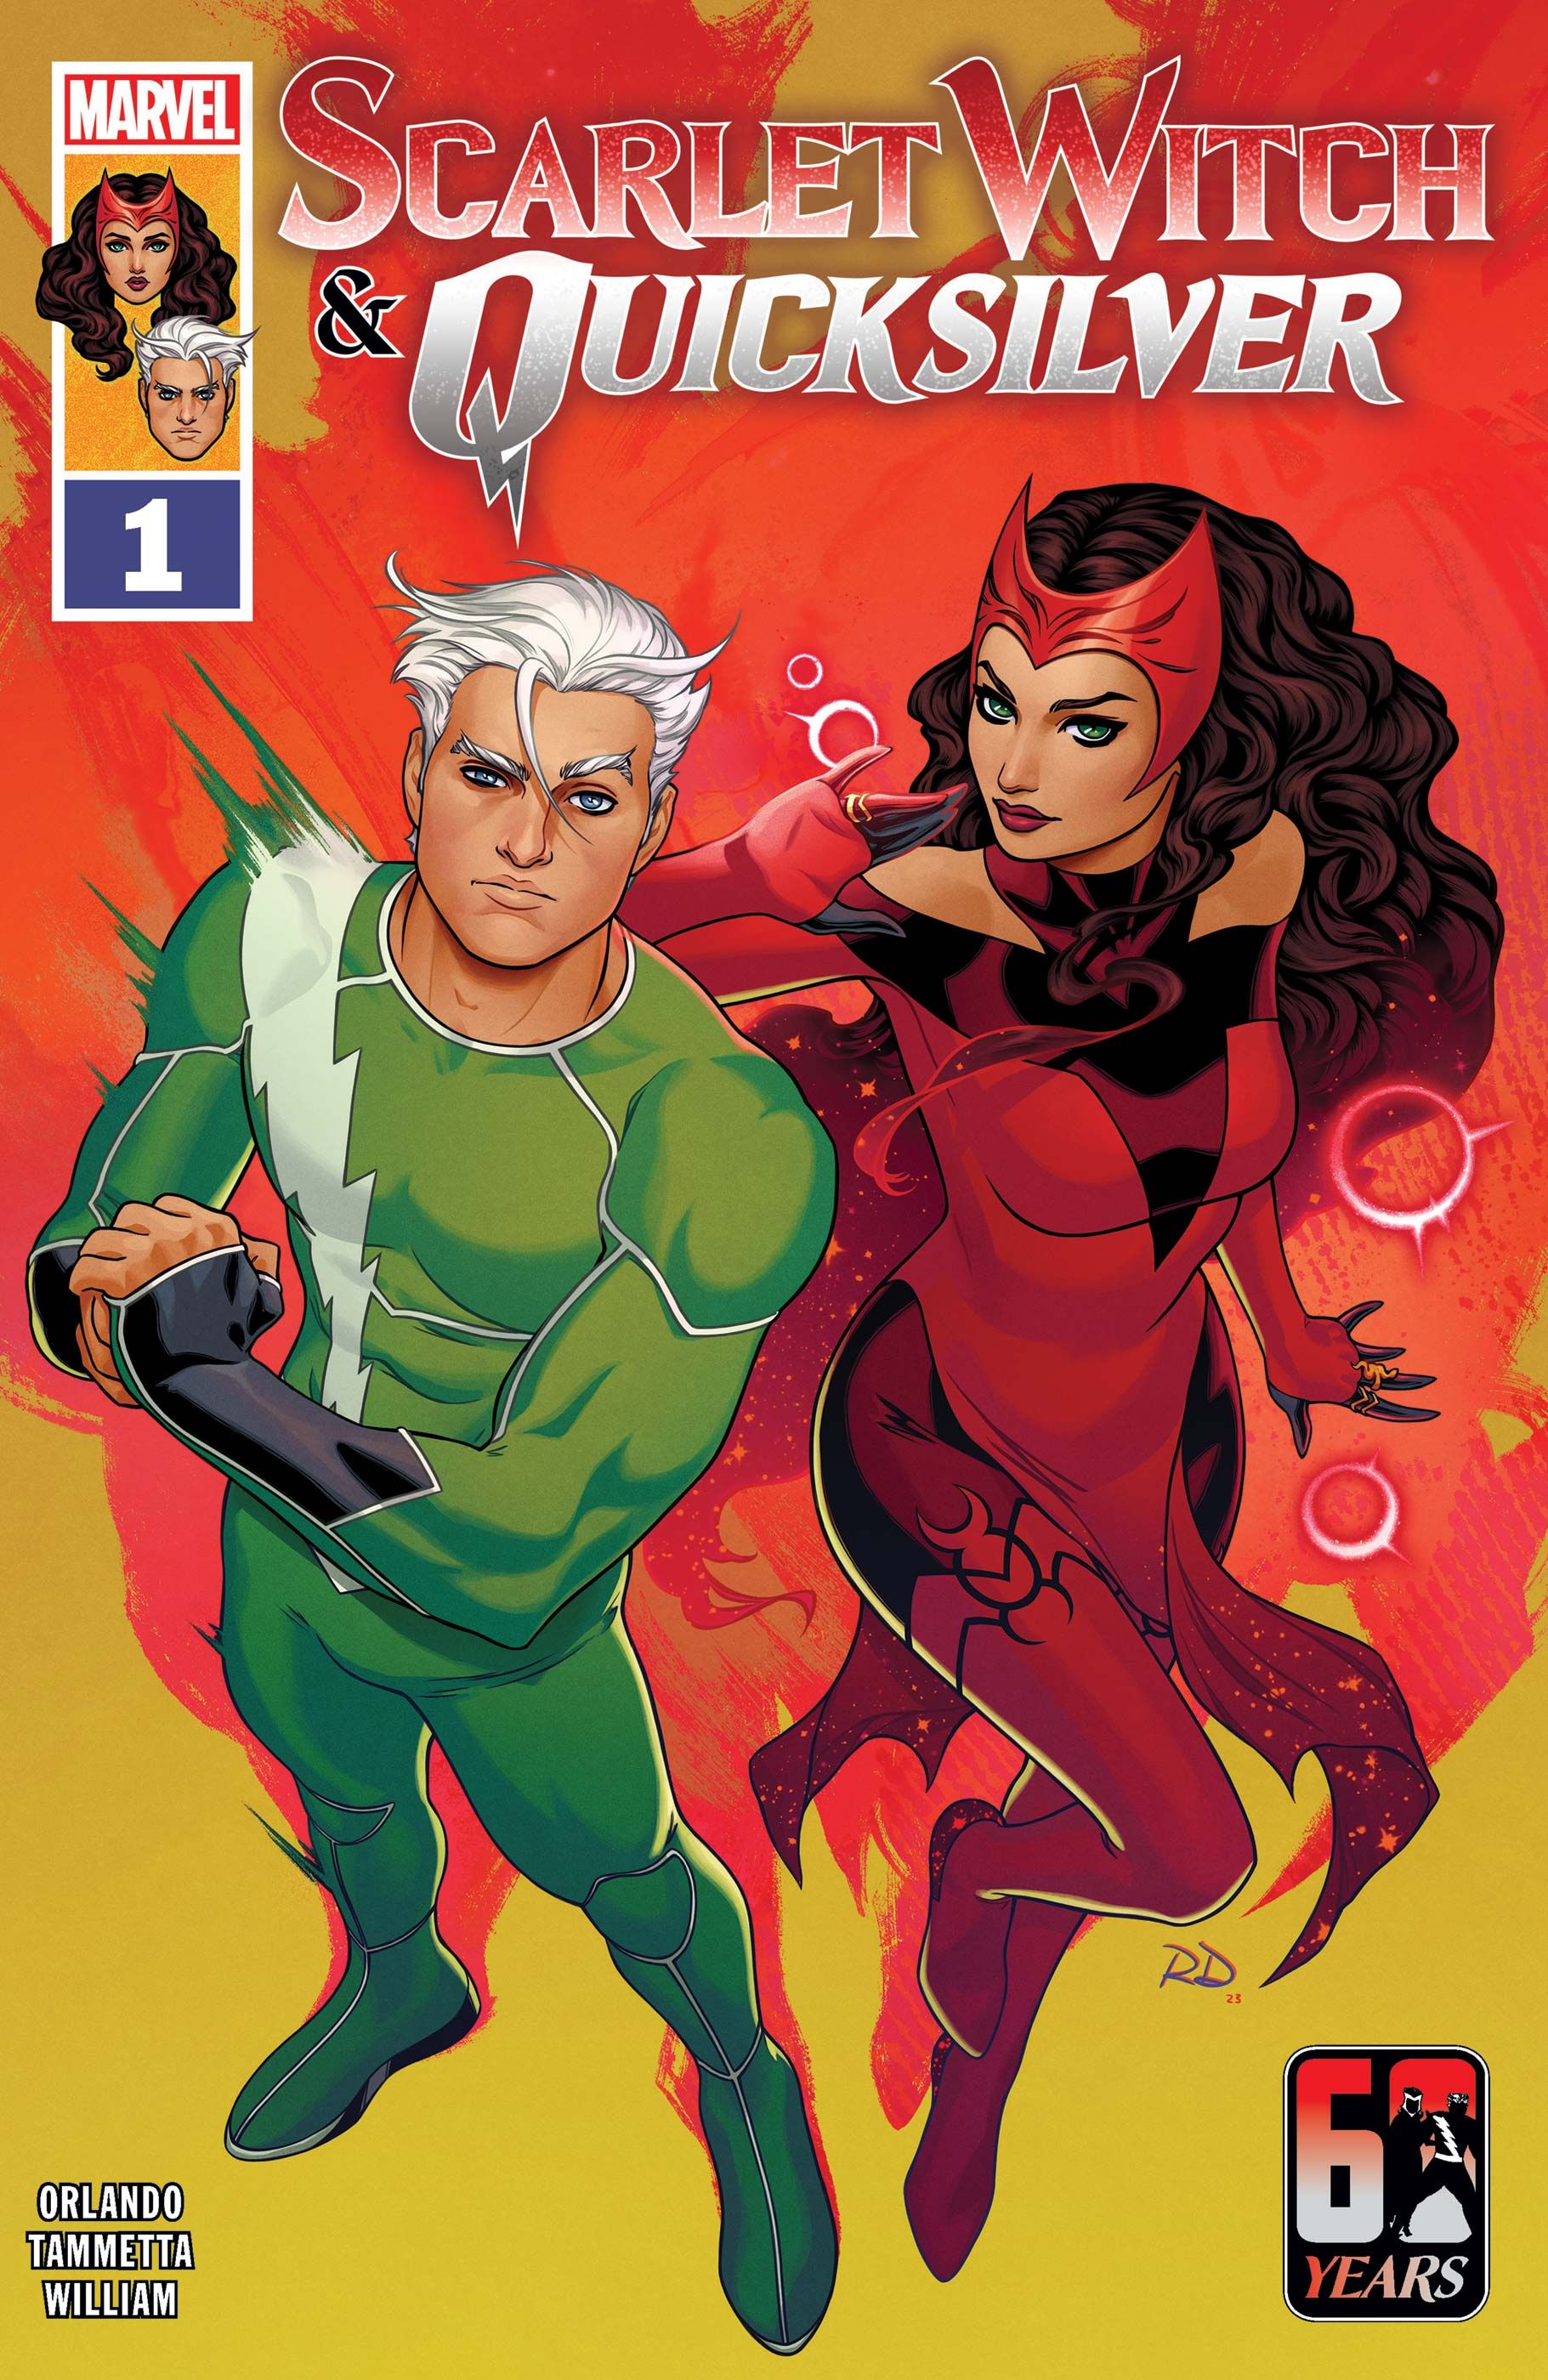 Quicksilver and Scarlet Witch stand by each other in Scarlet Witch and Quicksilver